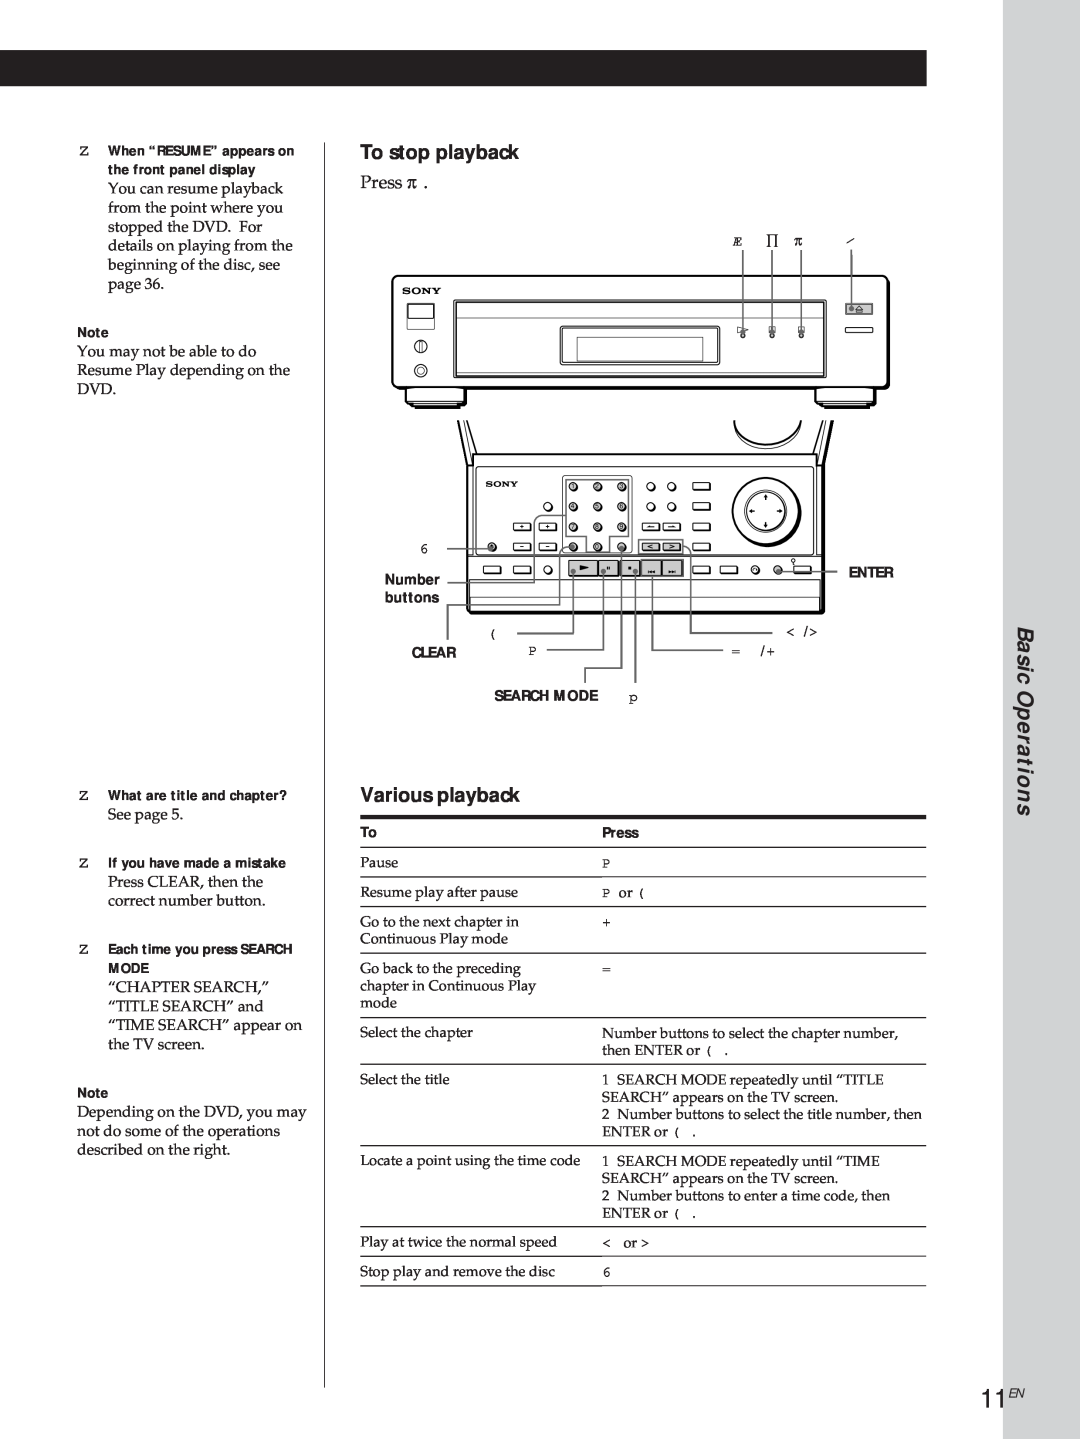 Sony DVP3980 manual 11EN, Basic Operations, To stop playback, Various playback, Press 